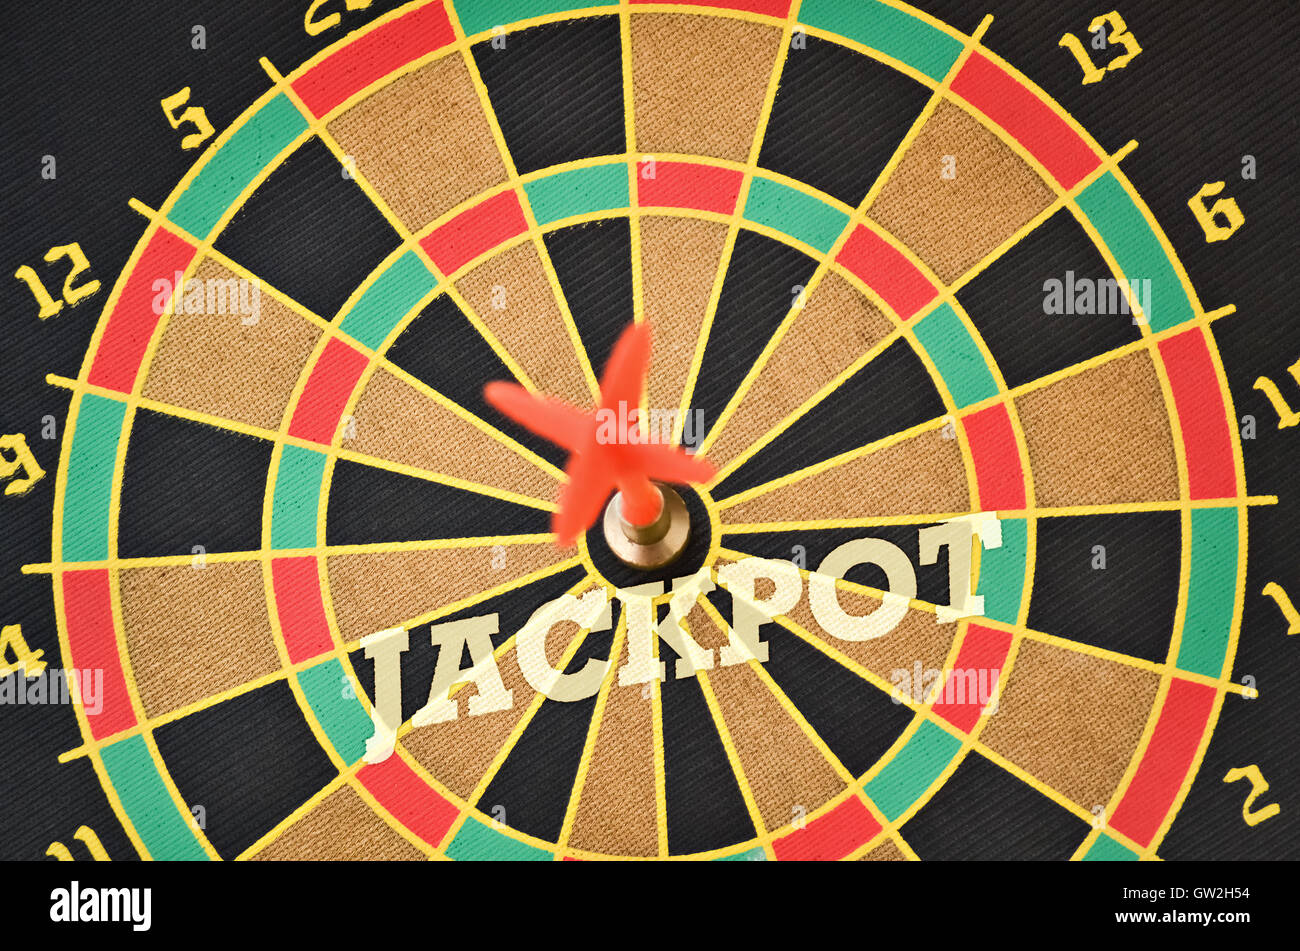 Word Jackpot written on the circular target with a plastic feather in the center Stock Photo